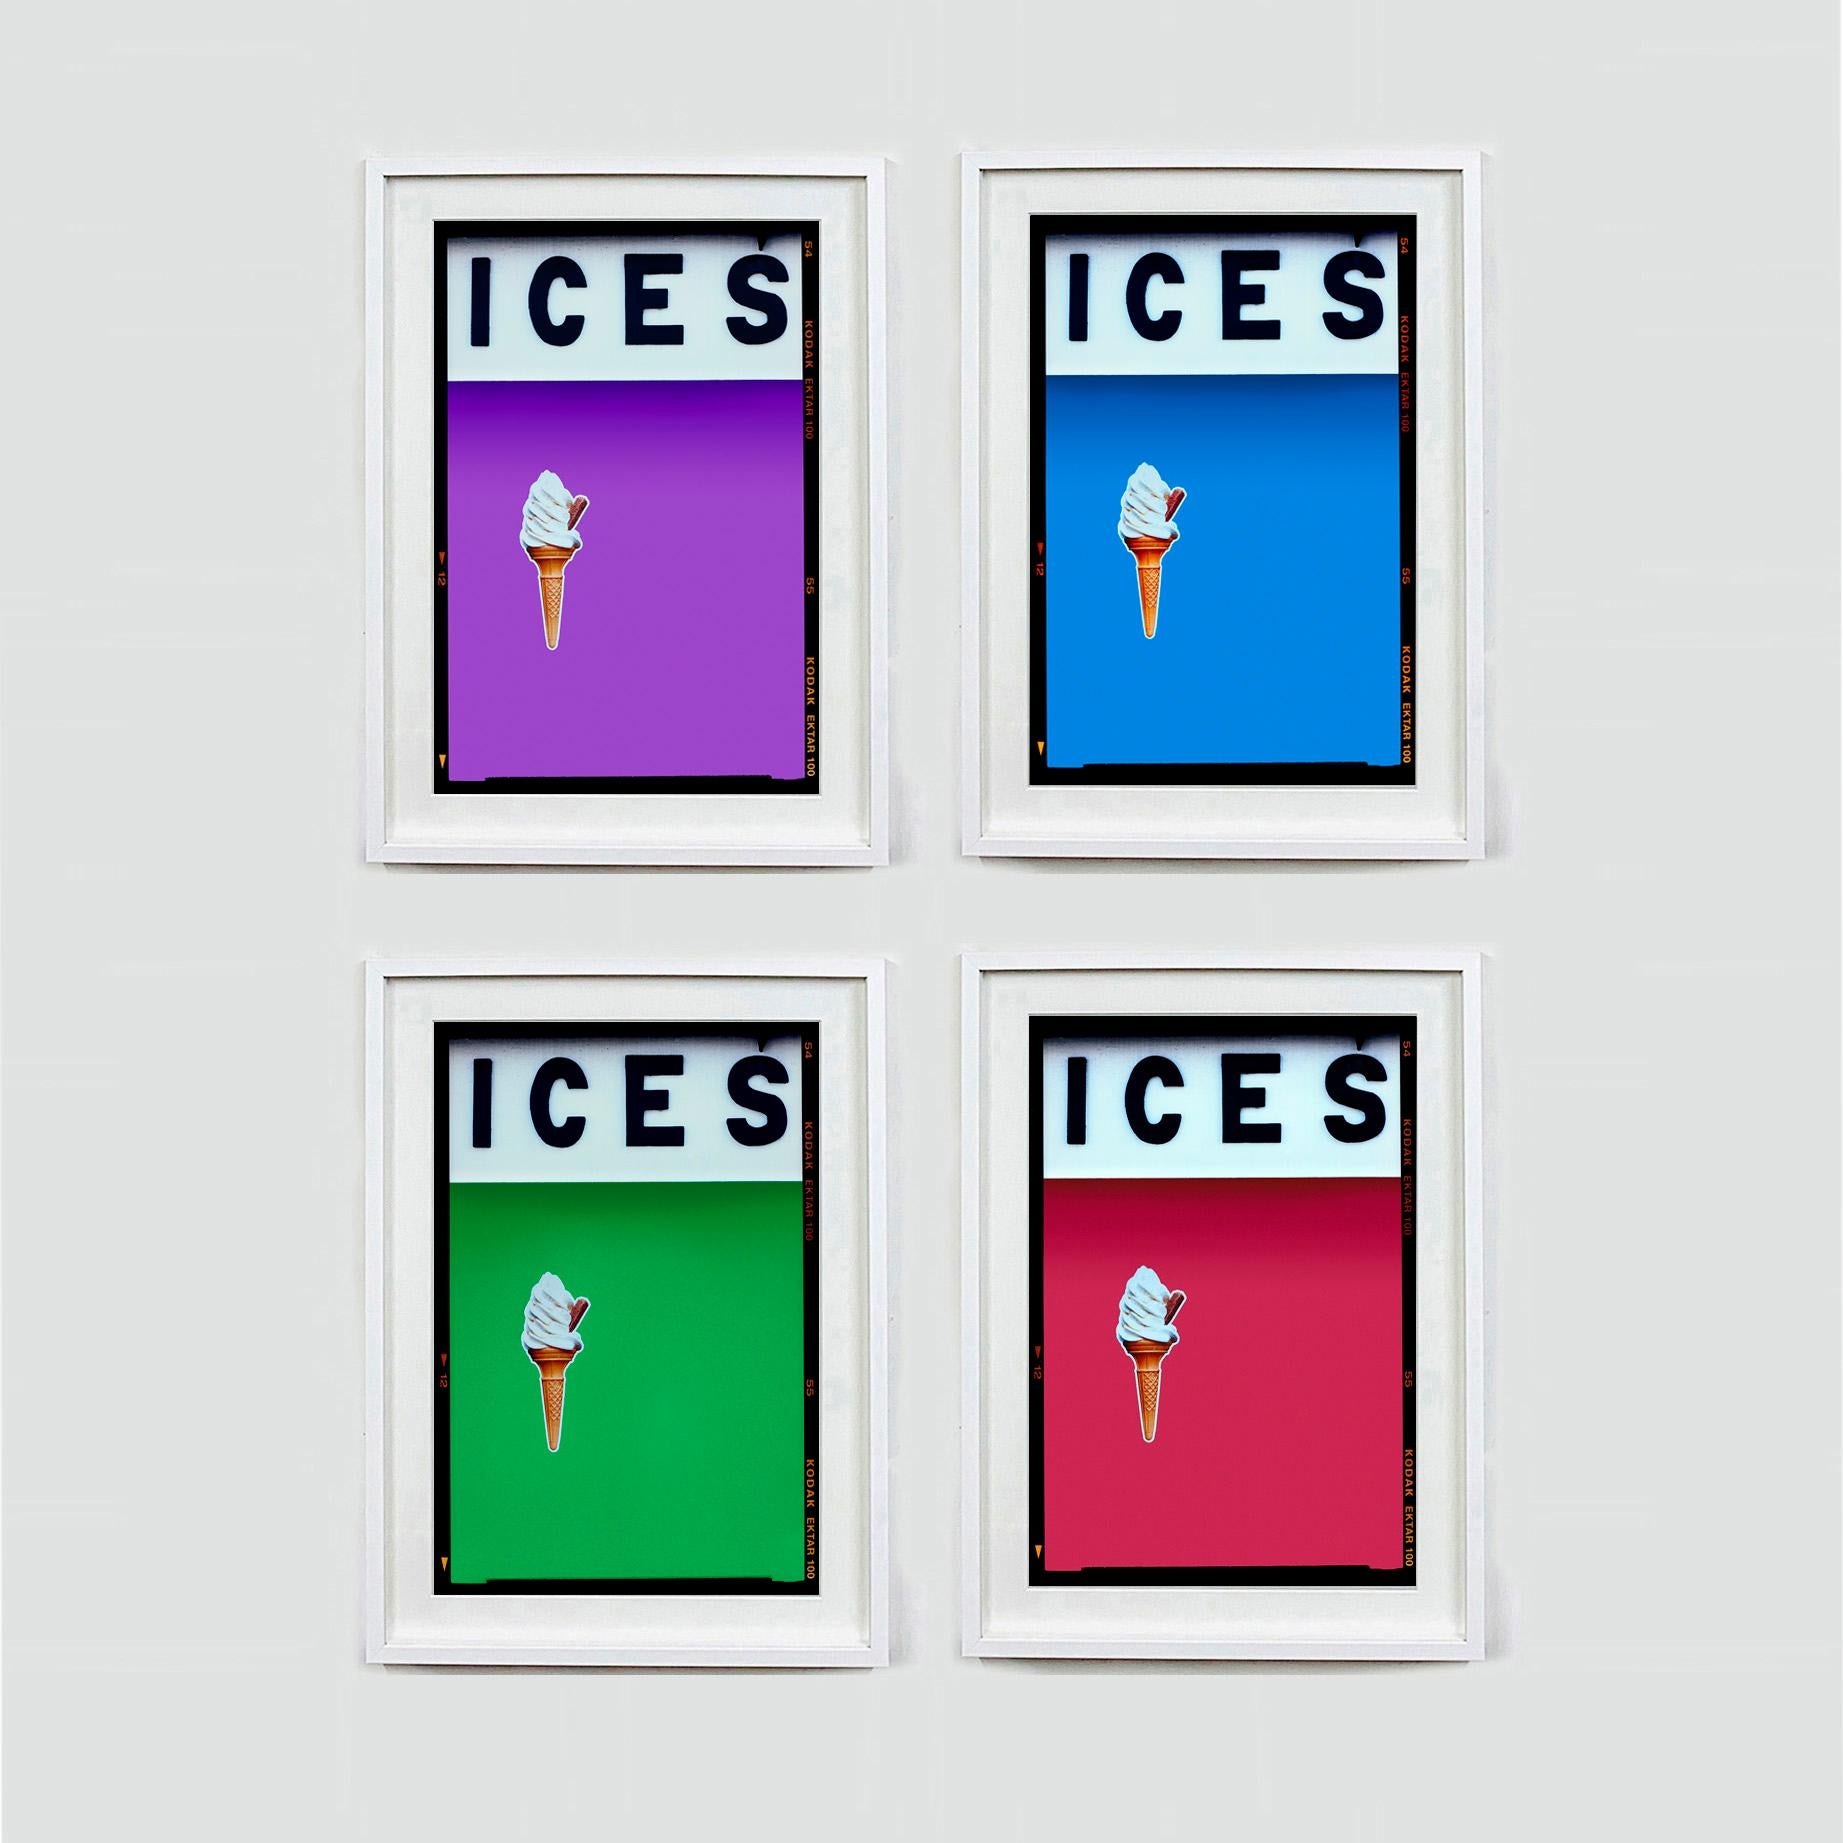 ICES - Four Framed Artworks, Photographs by Richard Heeps. 
Featured here Lilac, Sky Blue, Green and Raspberry. Get in touch to request other sizes or color combinations.

Each artwork measures 21.25" x 16" Framed in a Choice of Black or White Box